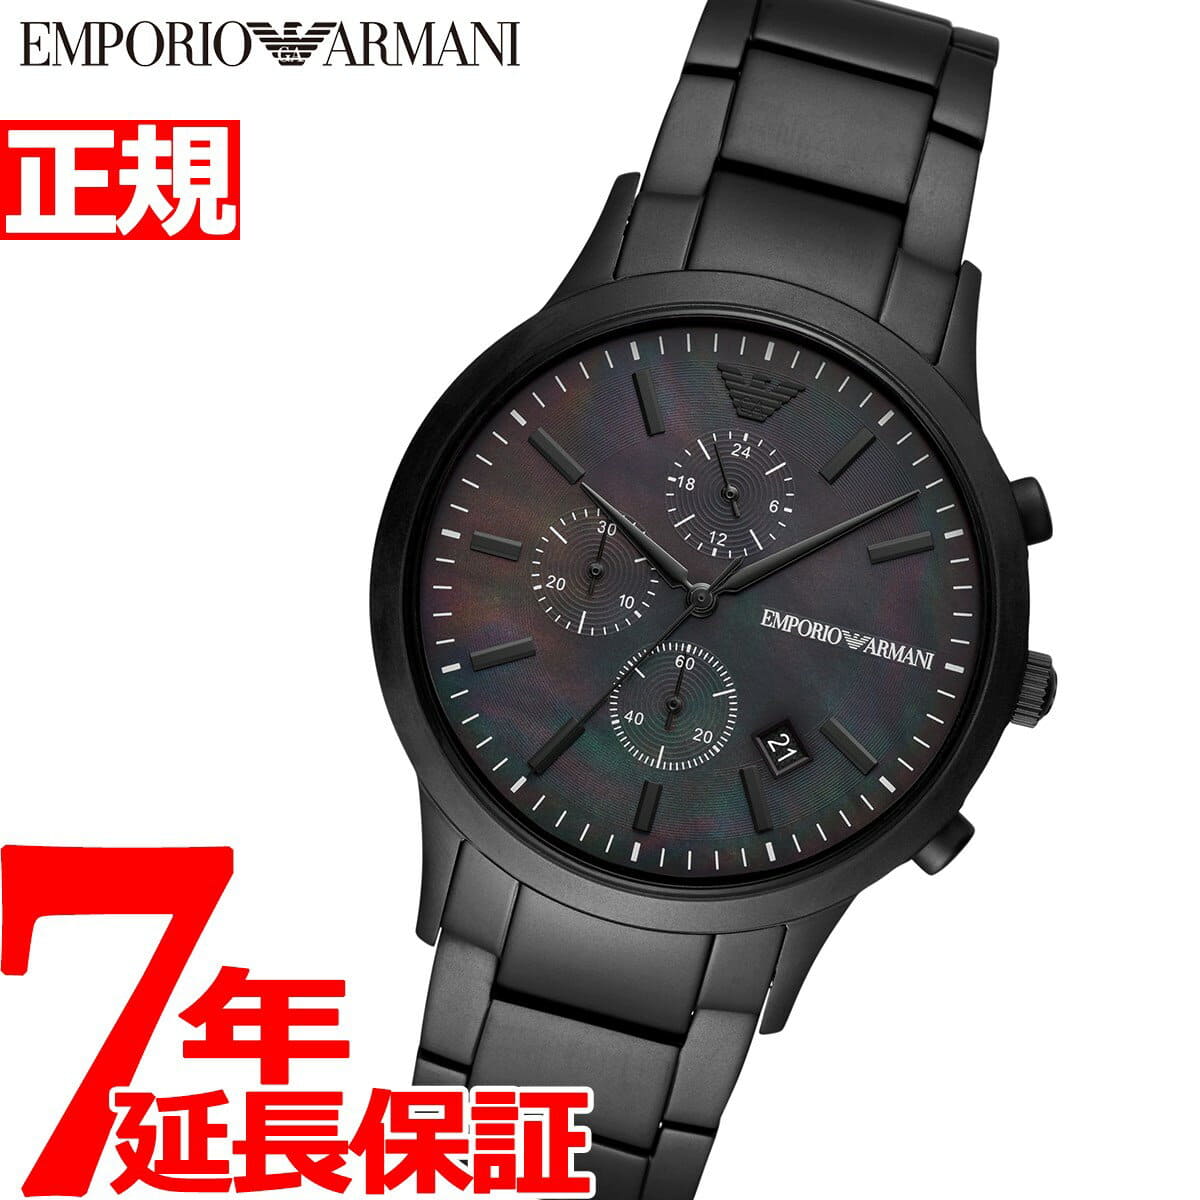 2,000 New]It to Chronograph mens ARMANI up is AR11275 - Emporio & Store to 55.5 FORWARD Armani EMPORIO times BE up